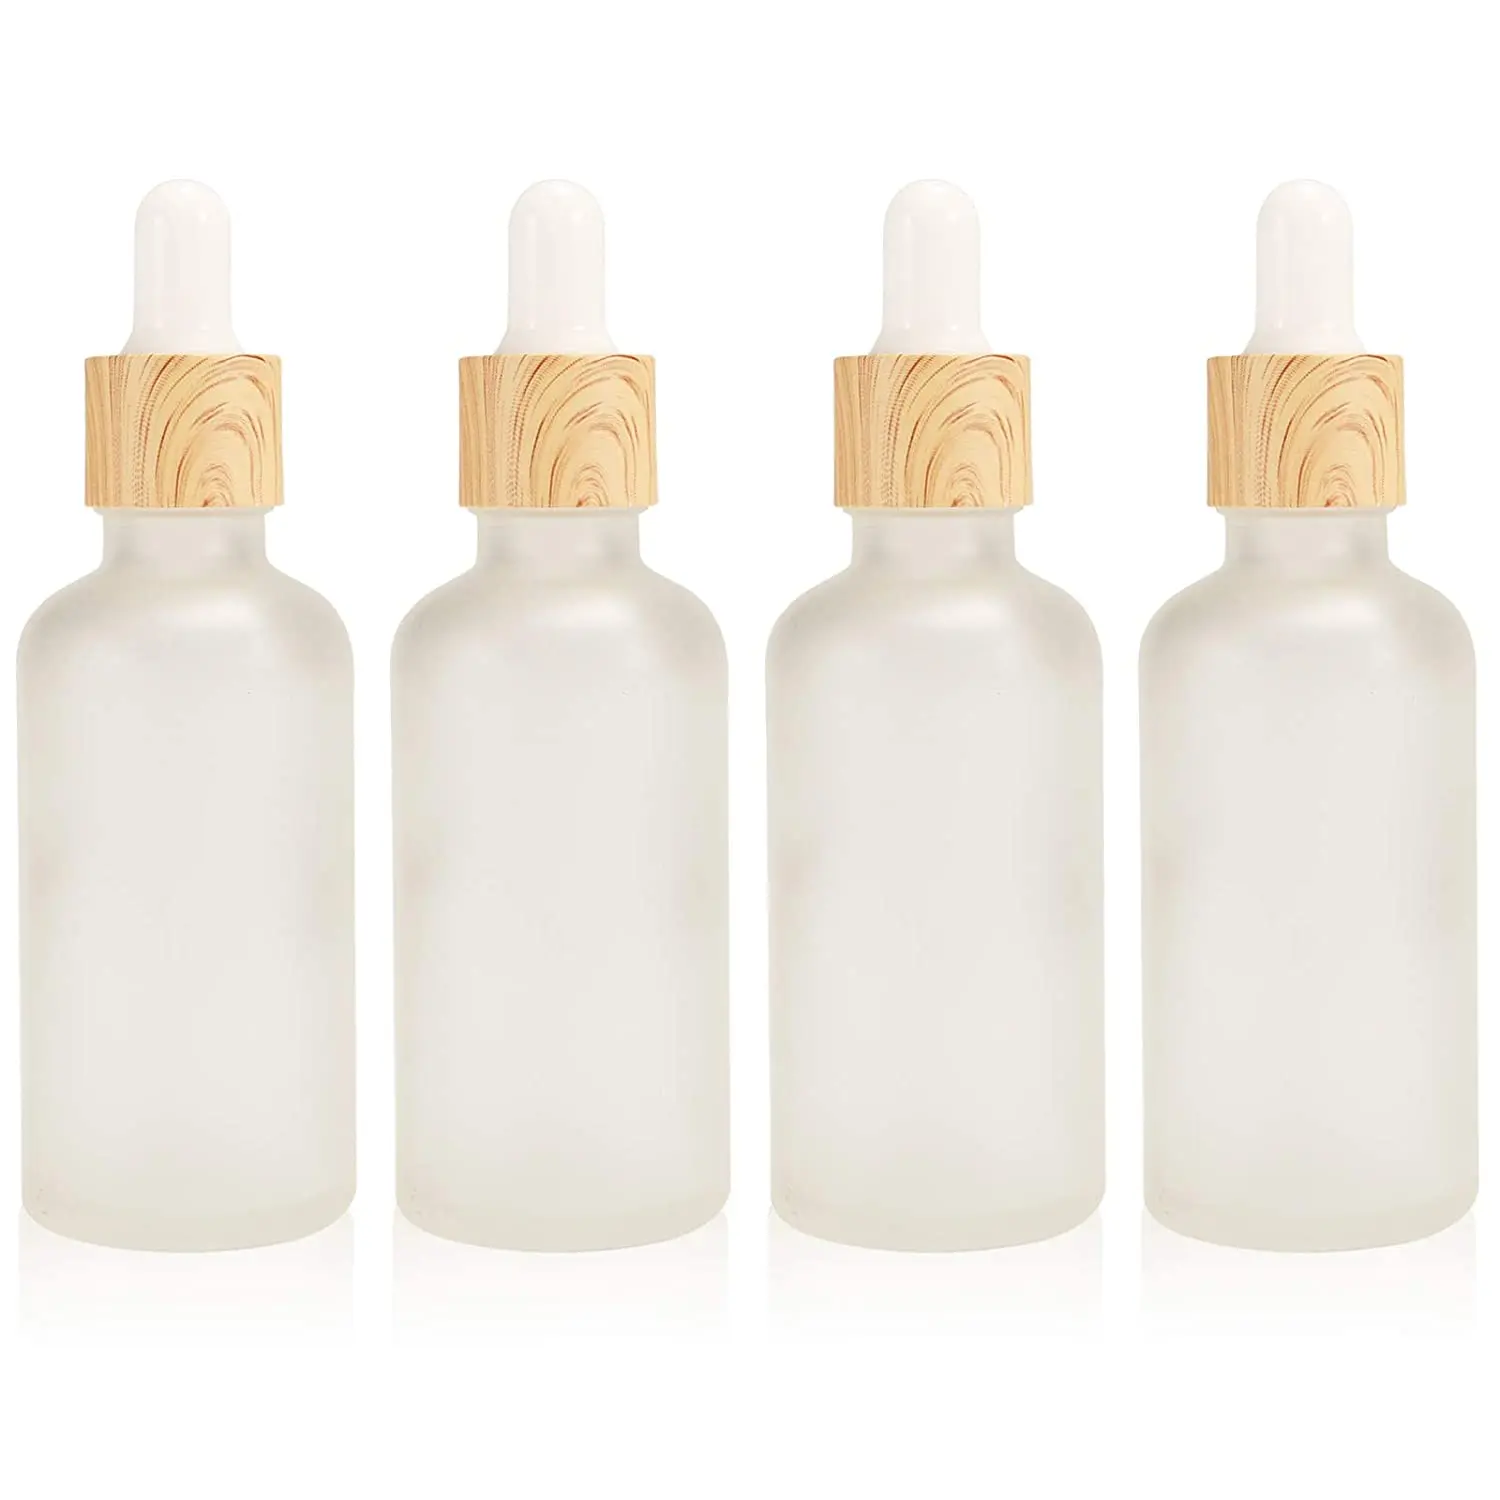 4pcs/50ml Frosted Glass Dropper Bottles Essential Oil Bottles With Eye Dropper Lids Perfume Sample Liquid Cosmetic Containers